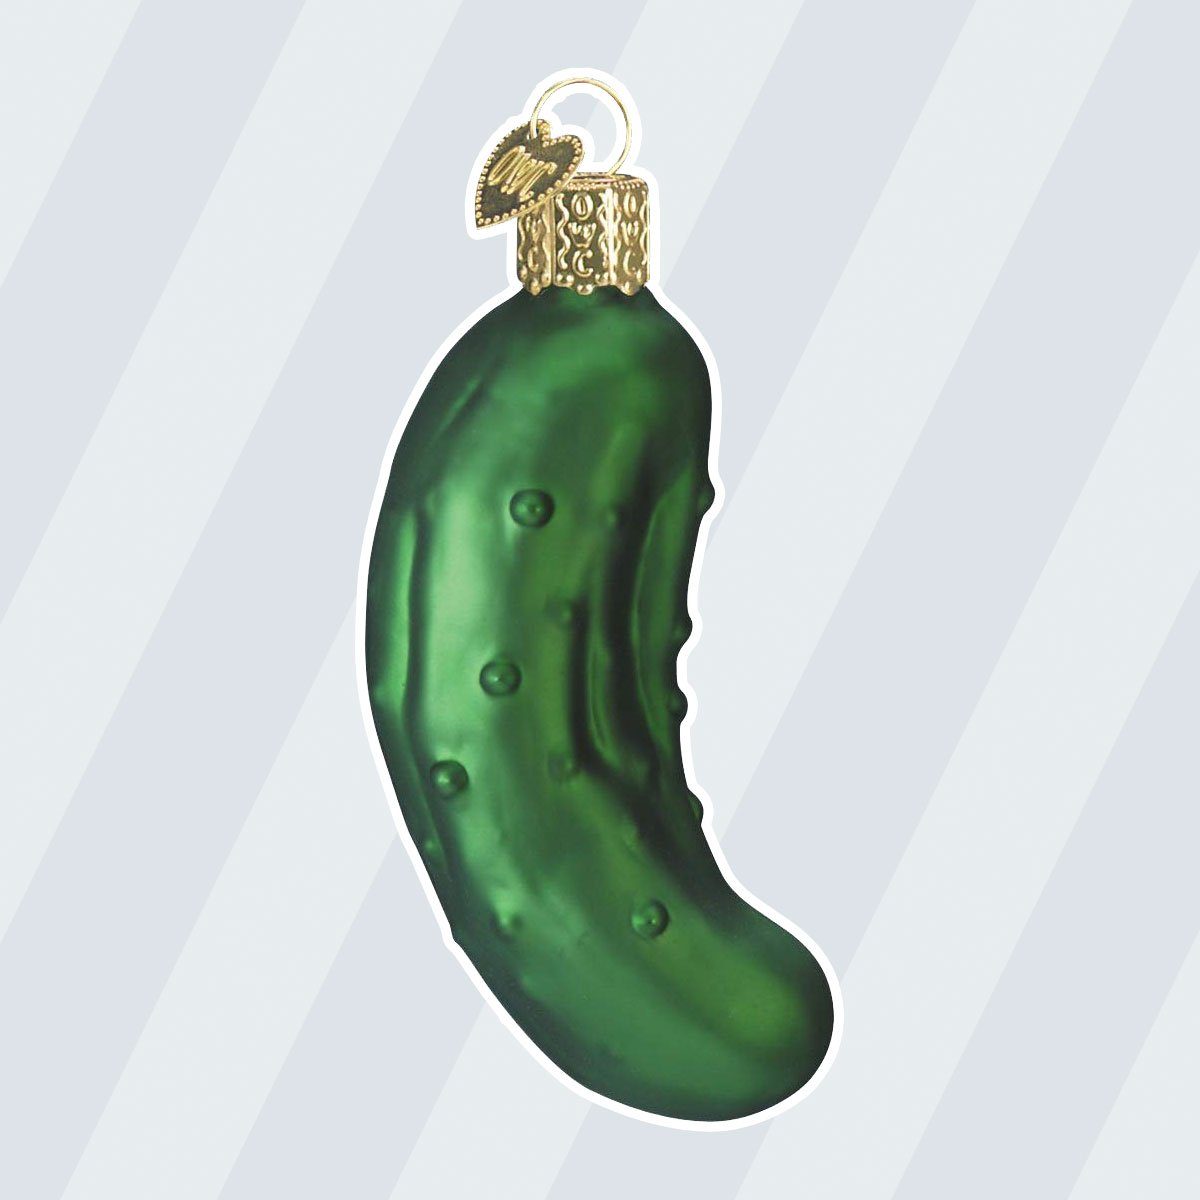 Old World Christmas Ornaments: Pickle Glass Blown Ornaments for Christmas Tree